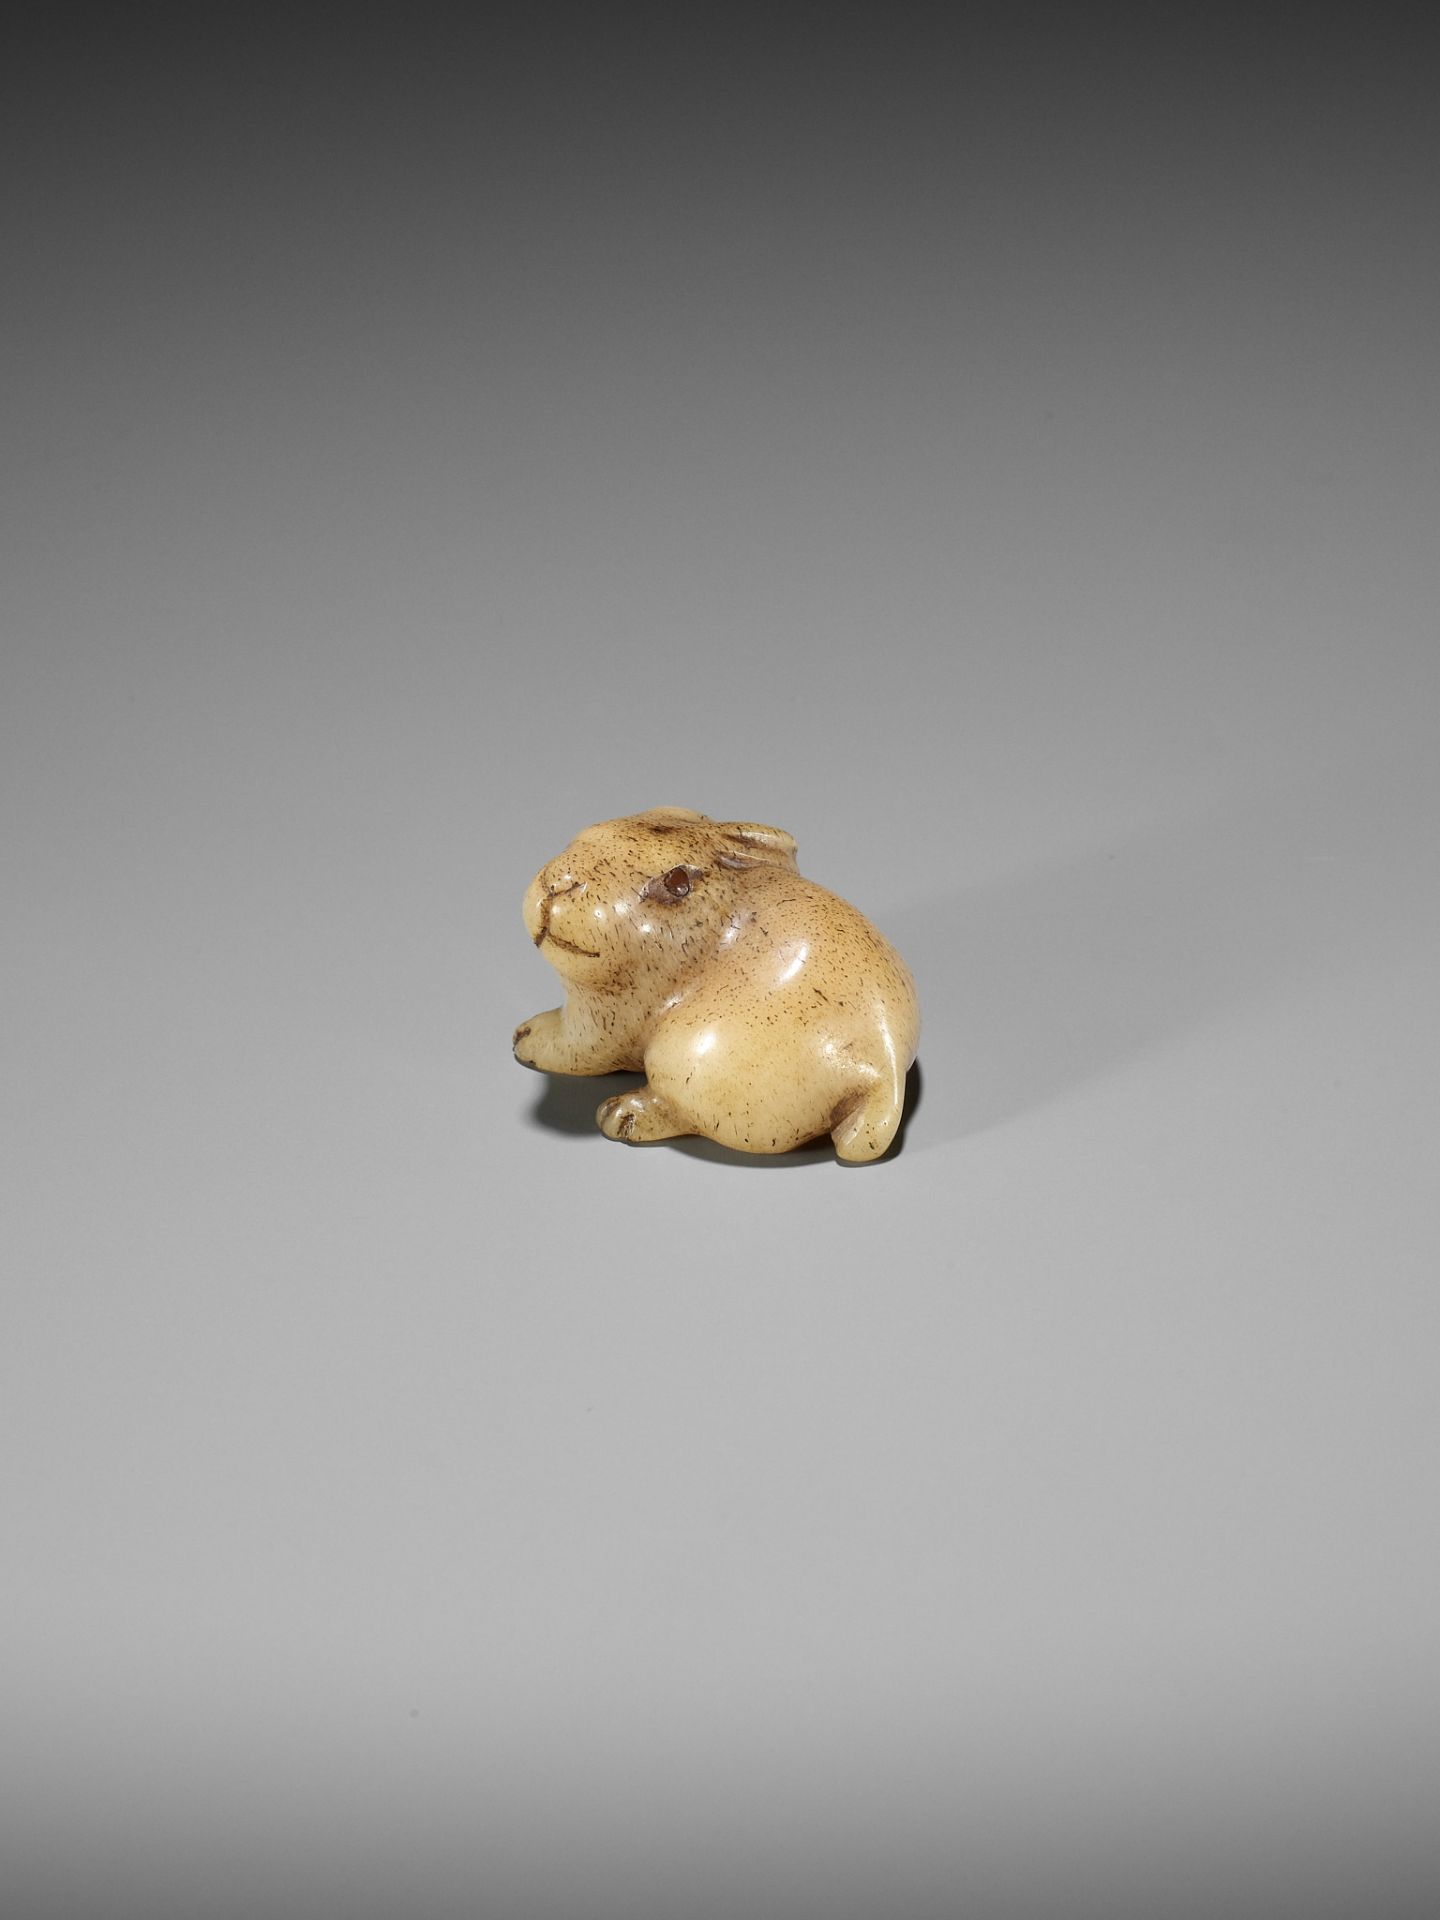 A CHARMING STAG ANTLER NETSUKE OF A HARE - Image 8 of 10